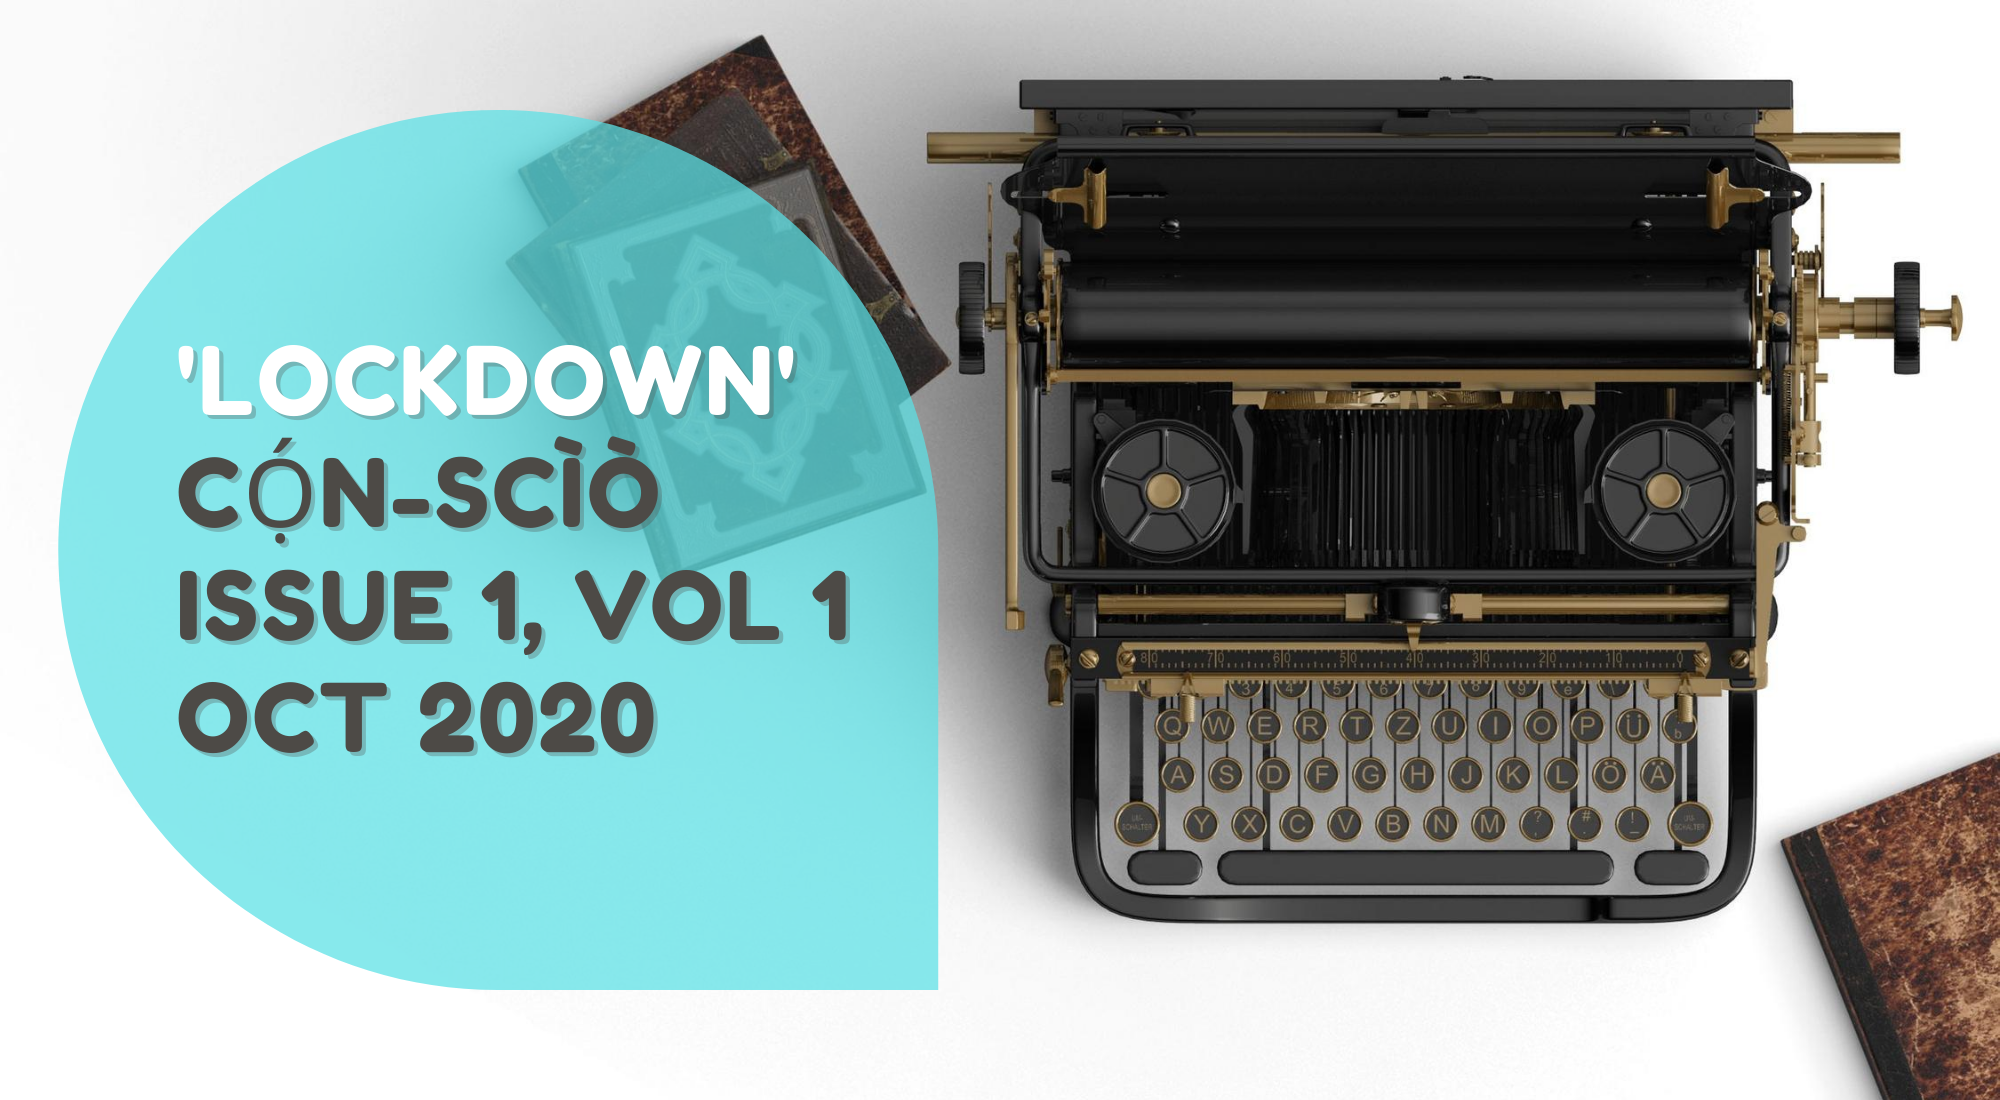 CALL FOR SUBMISSIONS: ‘THE LOCKDOWN’ — CỌ́N-SCÌÒ MAGAZINE ISSUE 1, VOL 1, JAN 2021